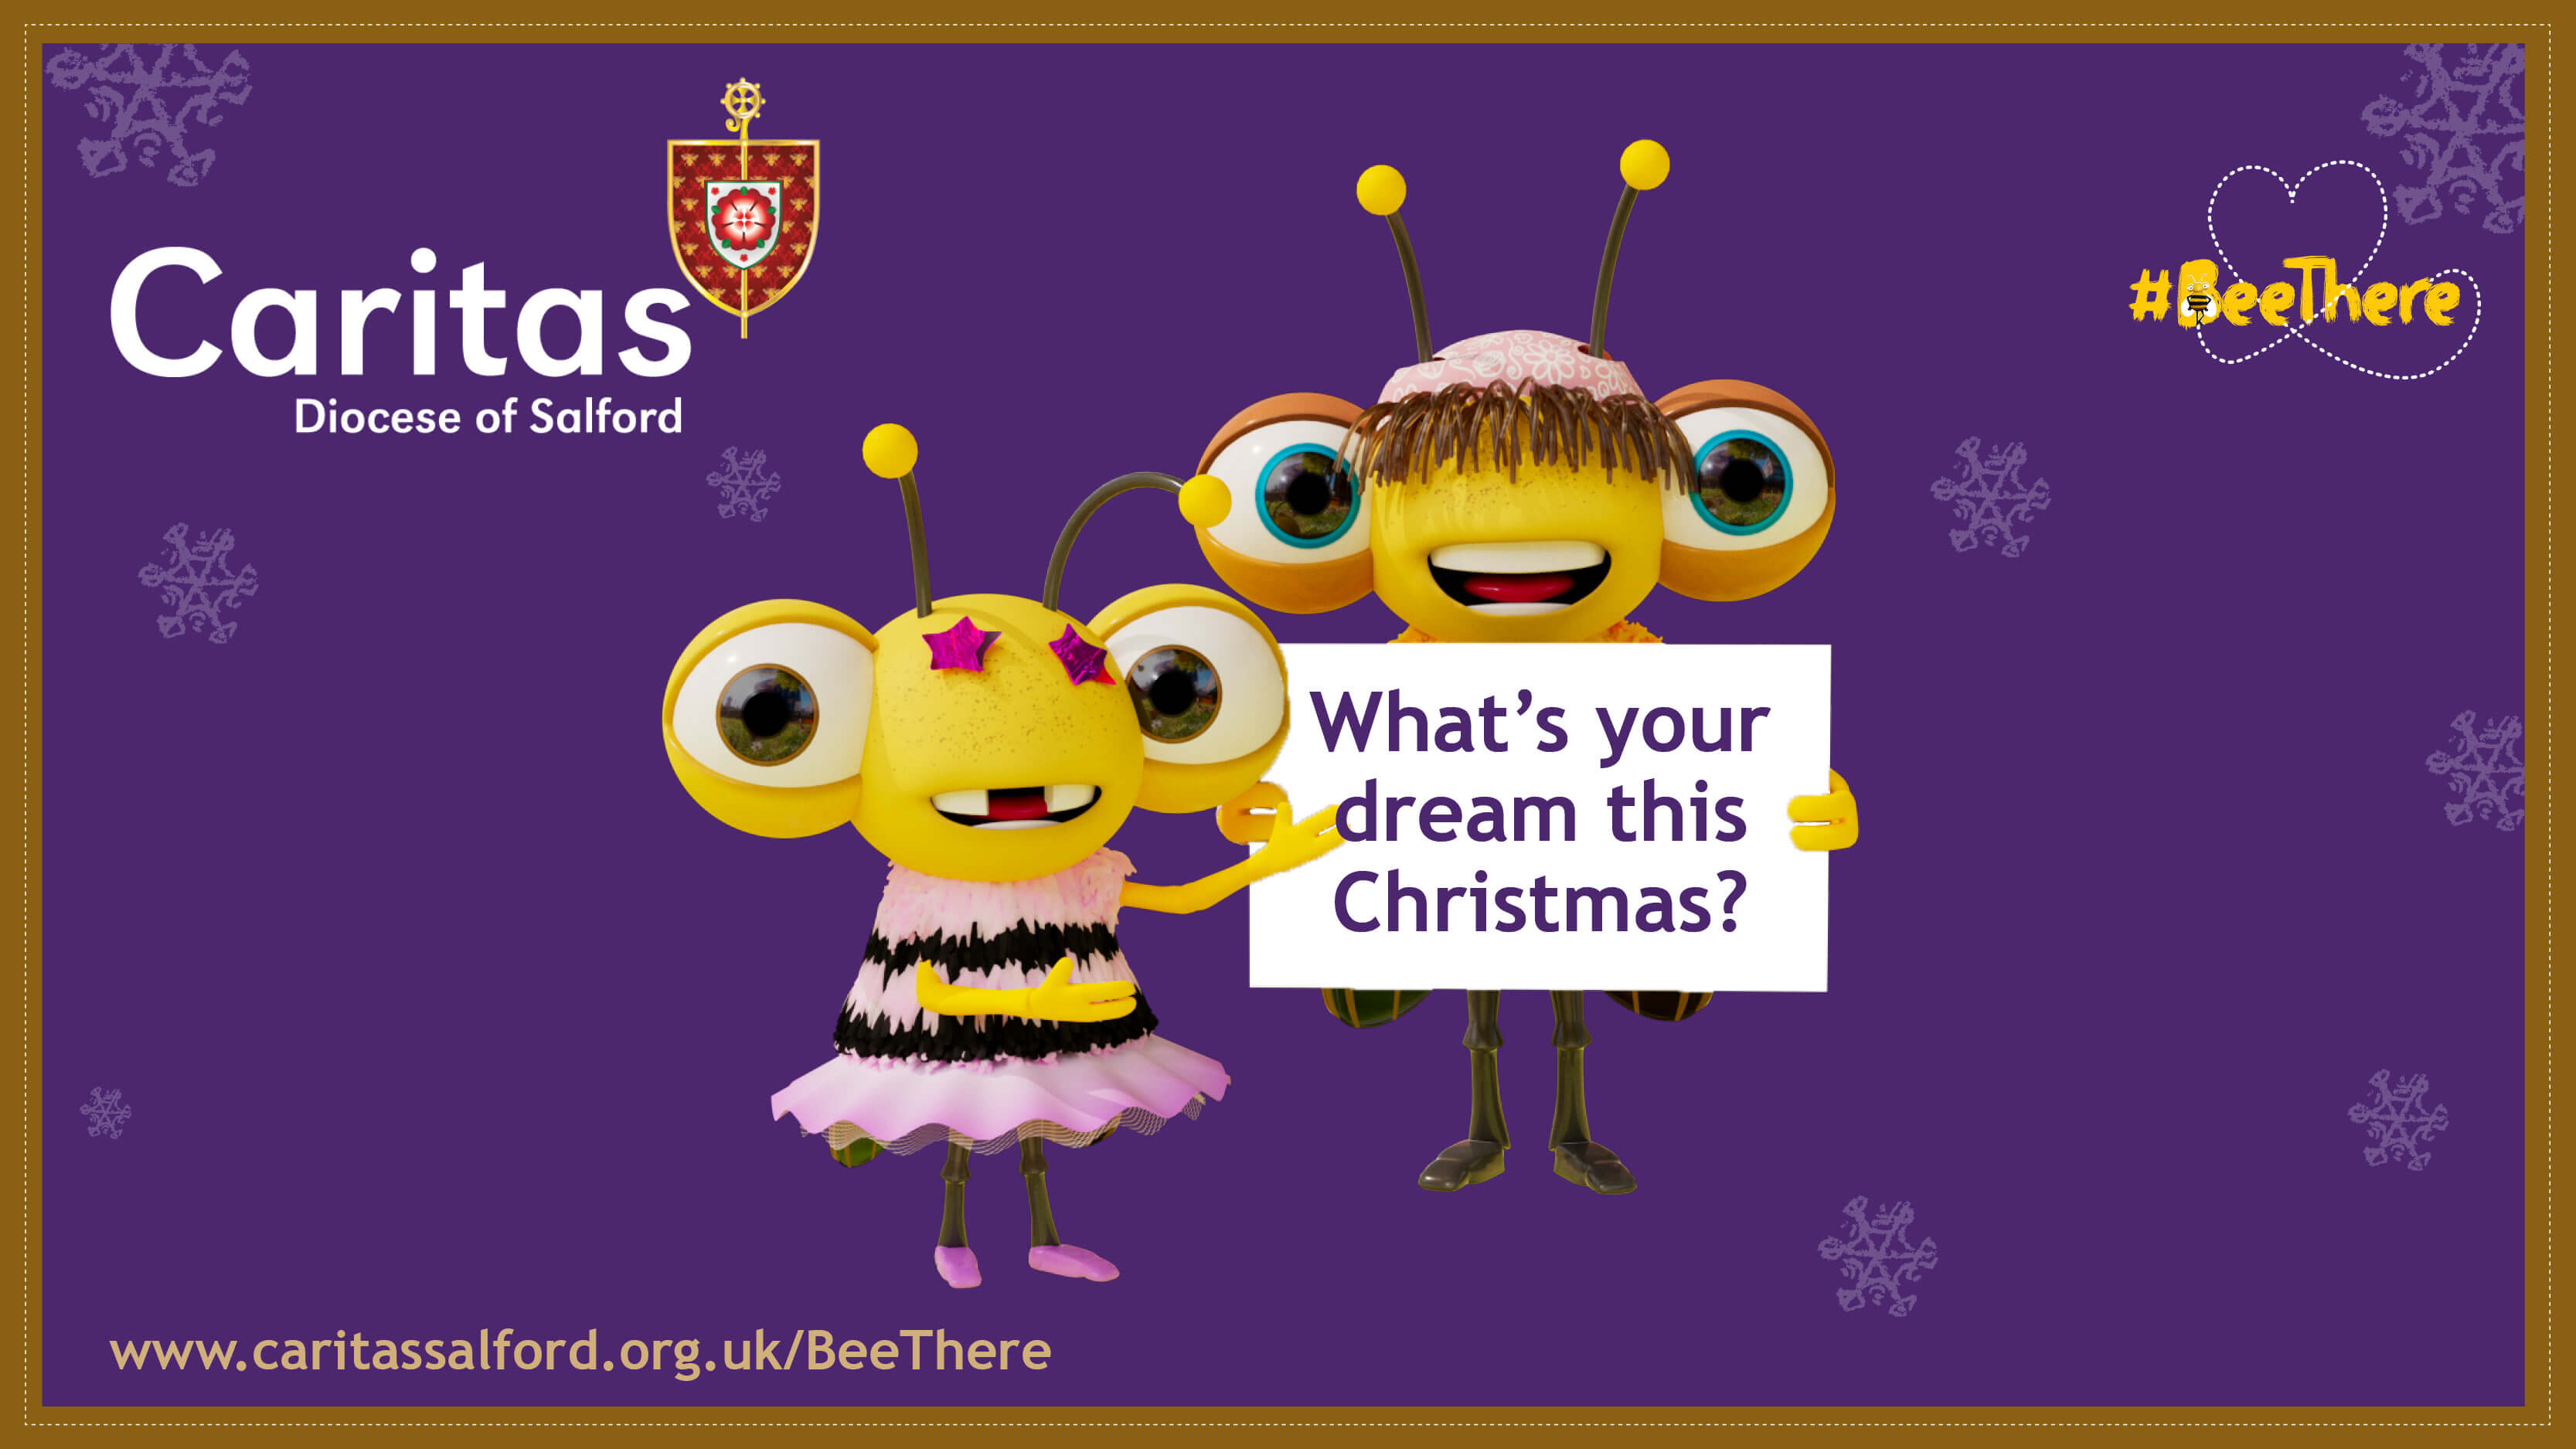 Will you ‘Bee There’ this Christmas?